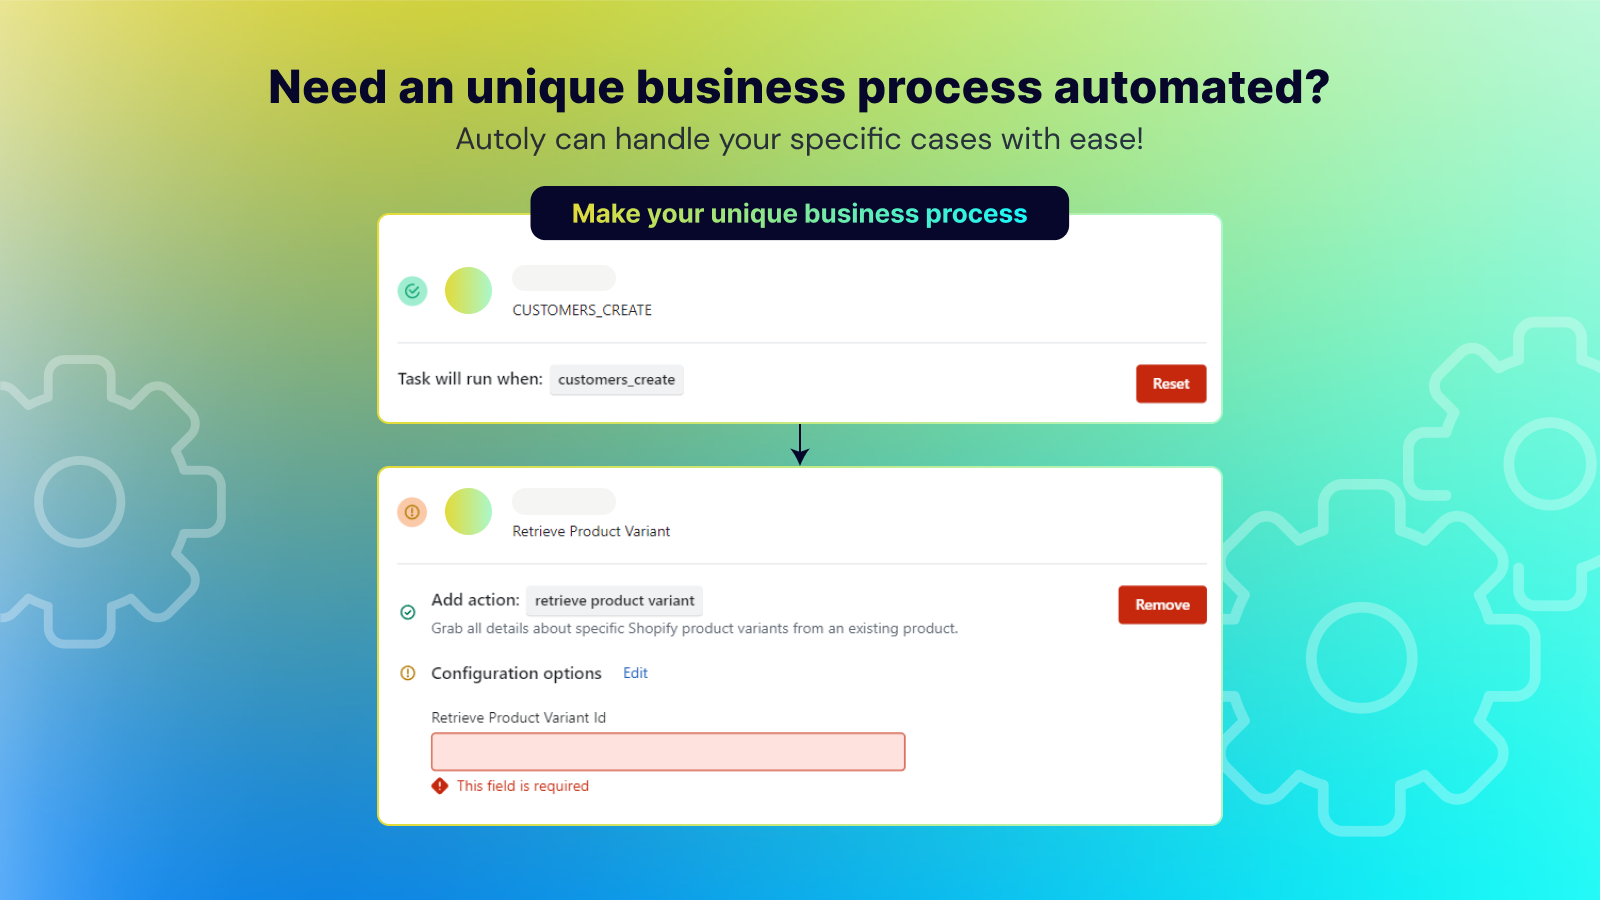 Need an unique business process automated